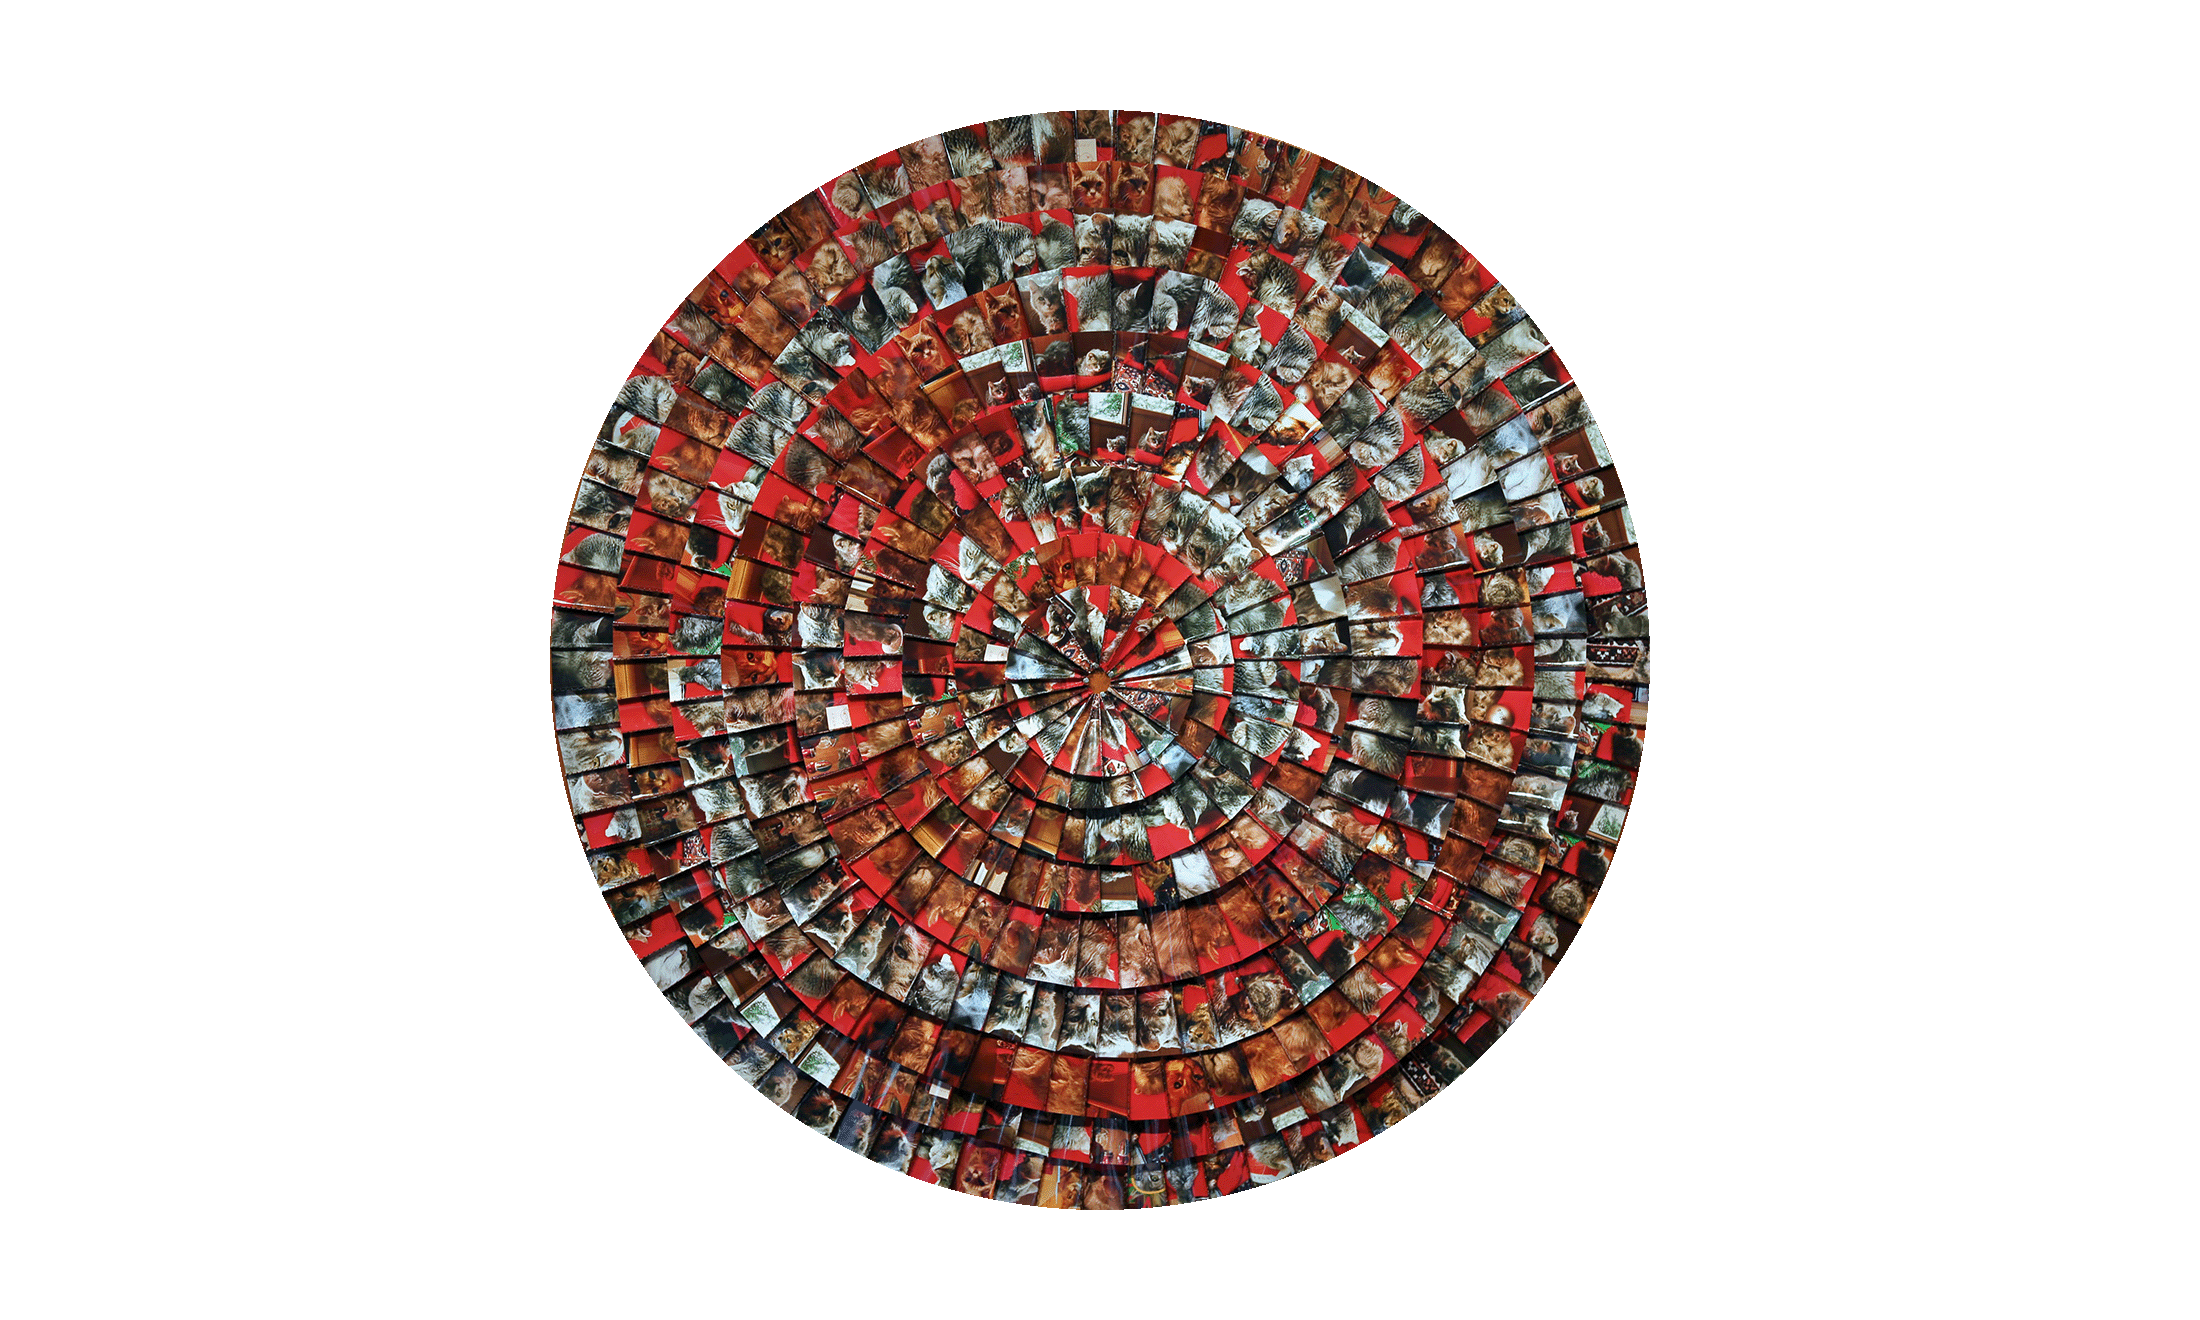 collage of cut close-up photos arranged in circular layers to create a full, gapless circle